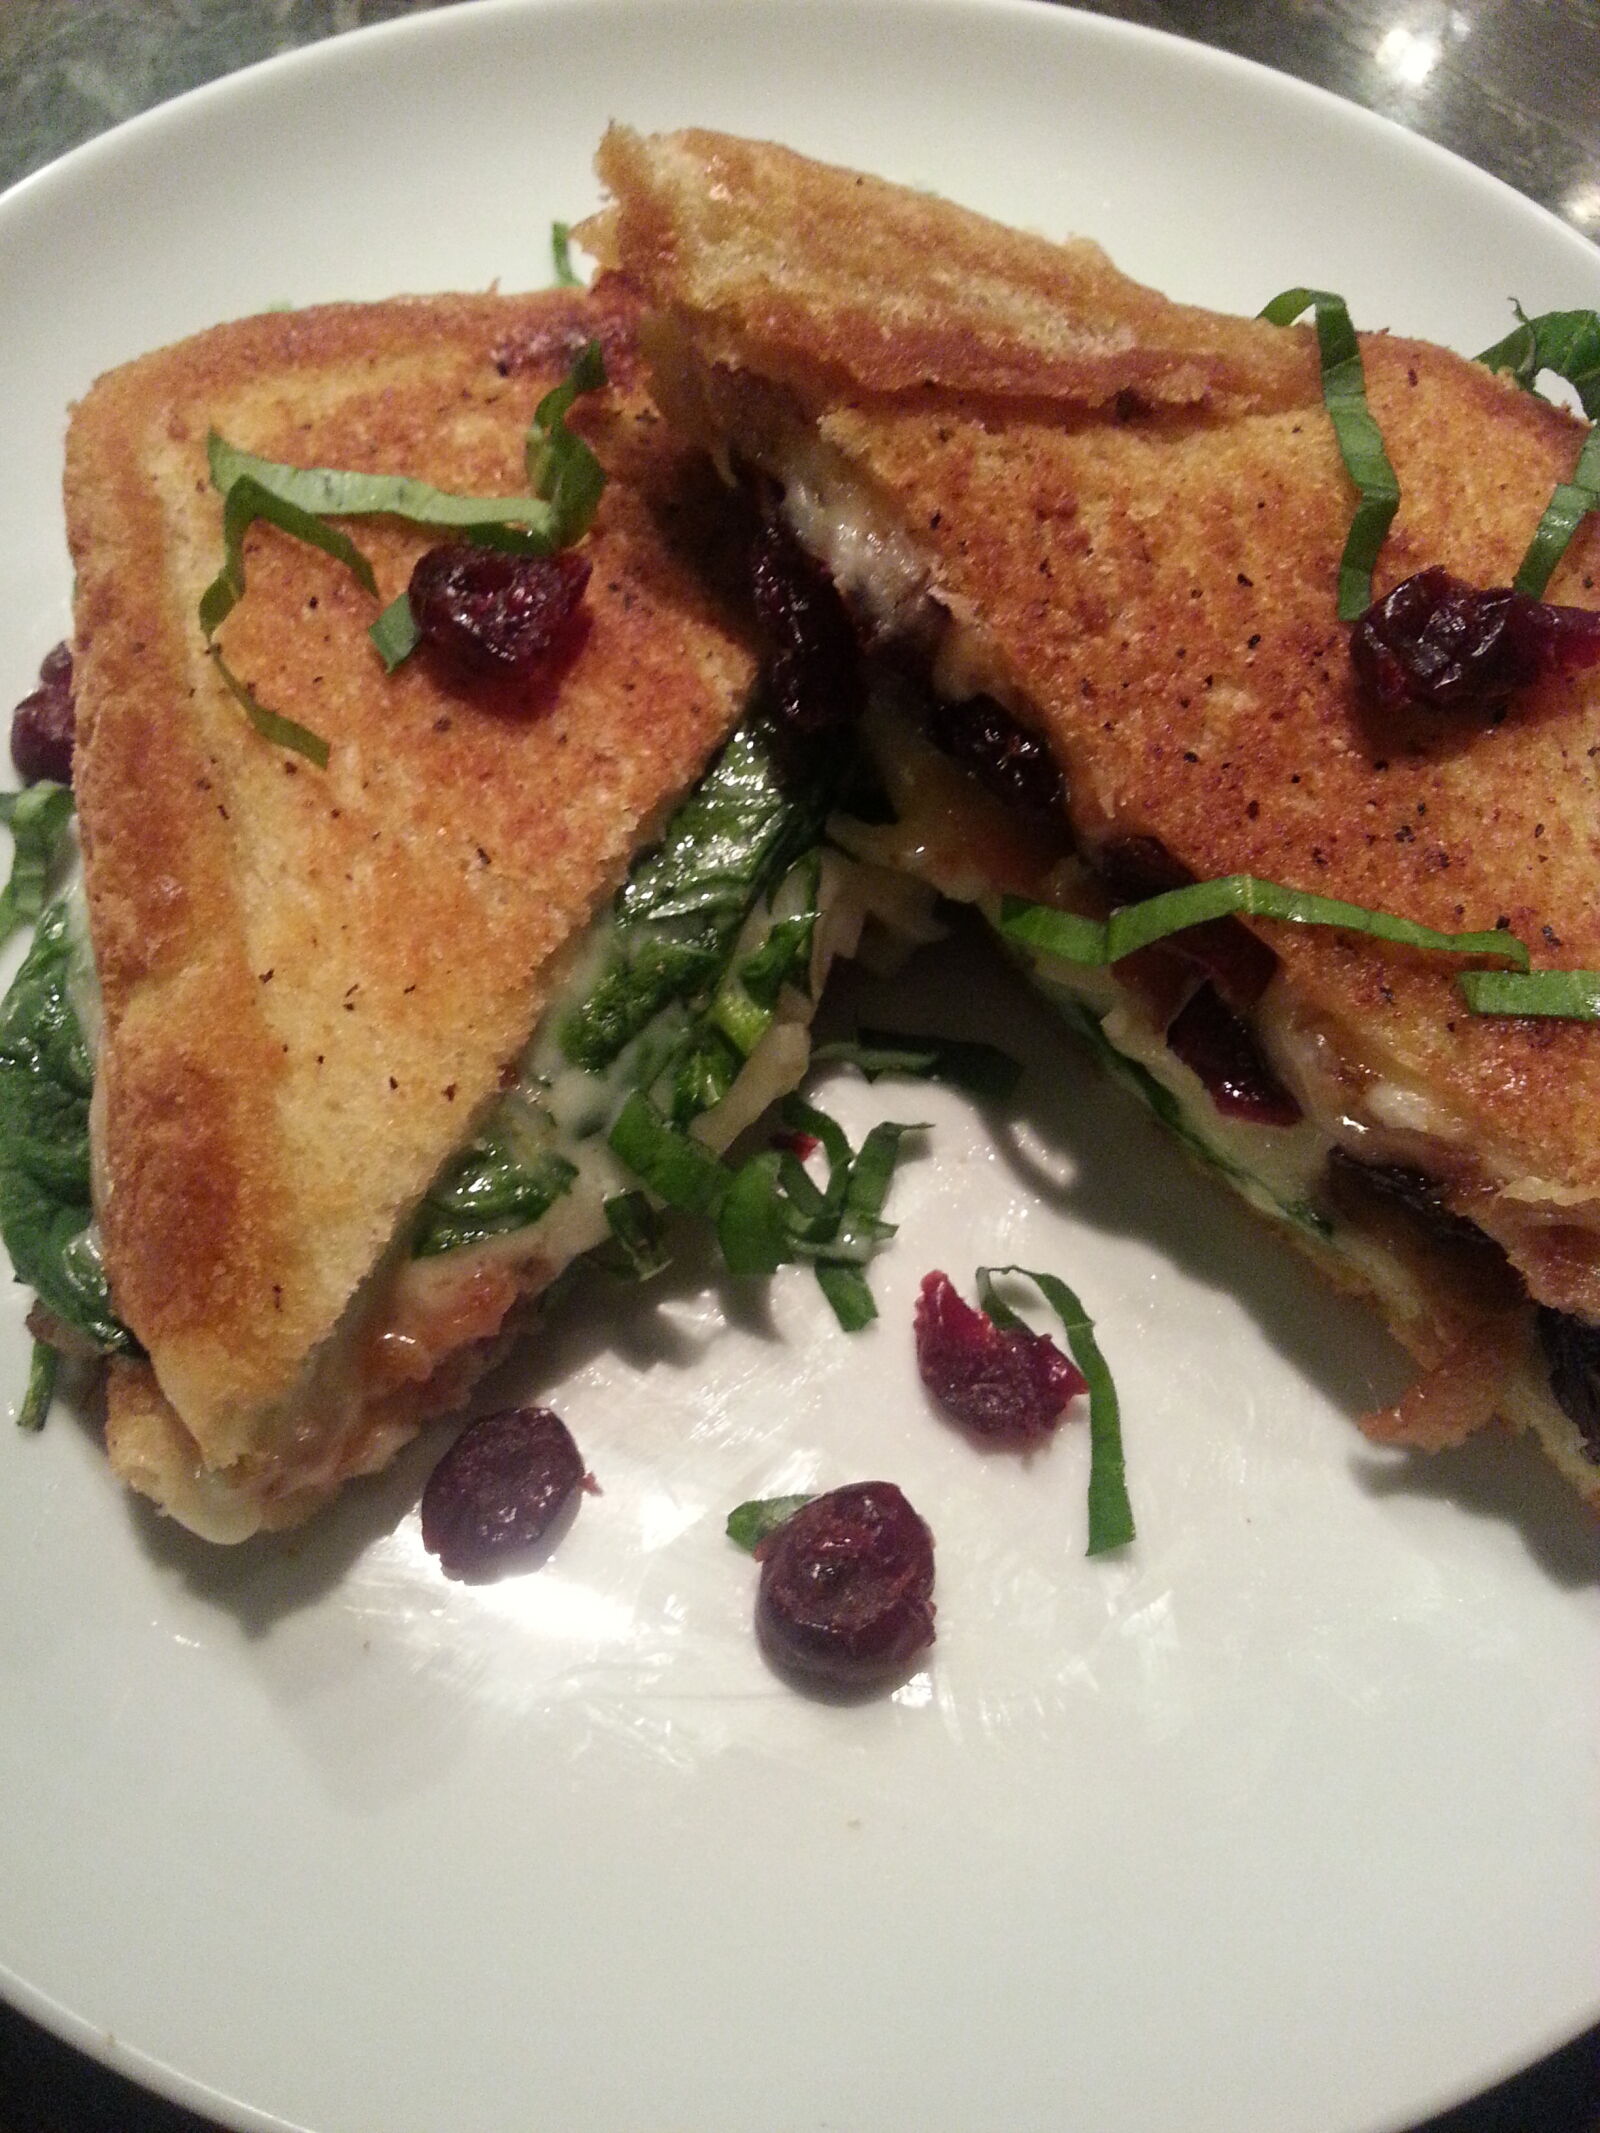 Samsung Galaxy S3 sample photo. Gourmet, grilled, cheese photography